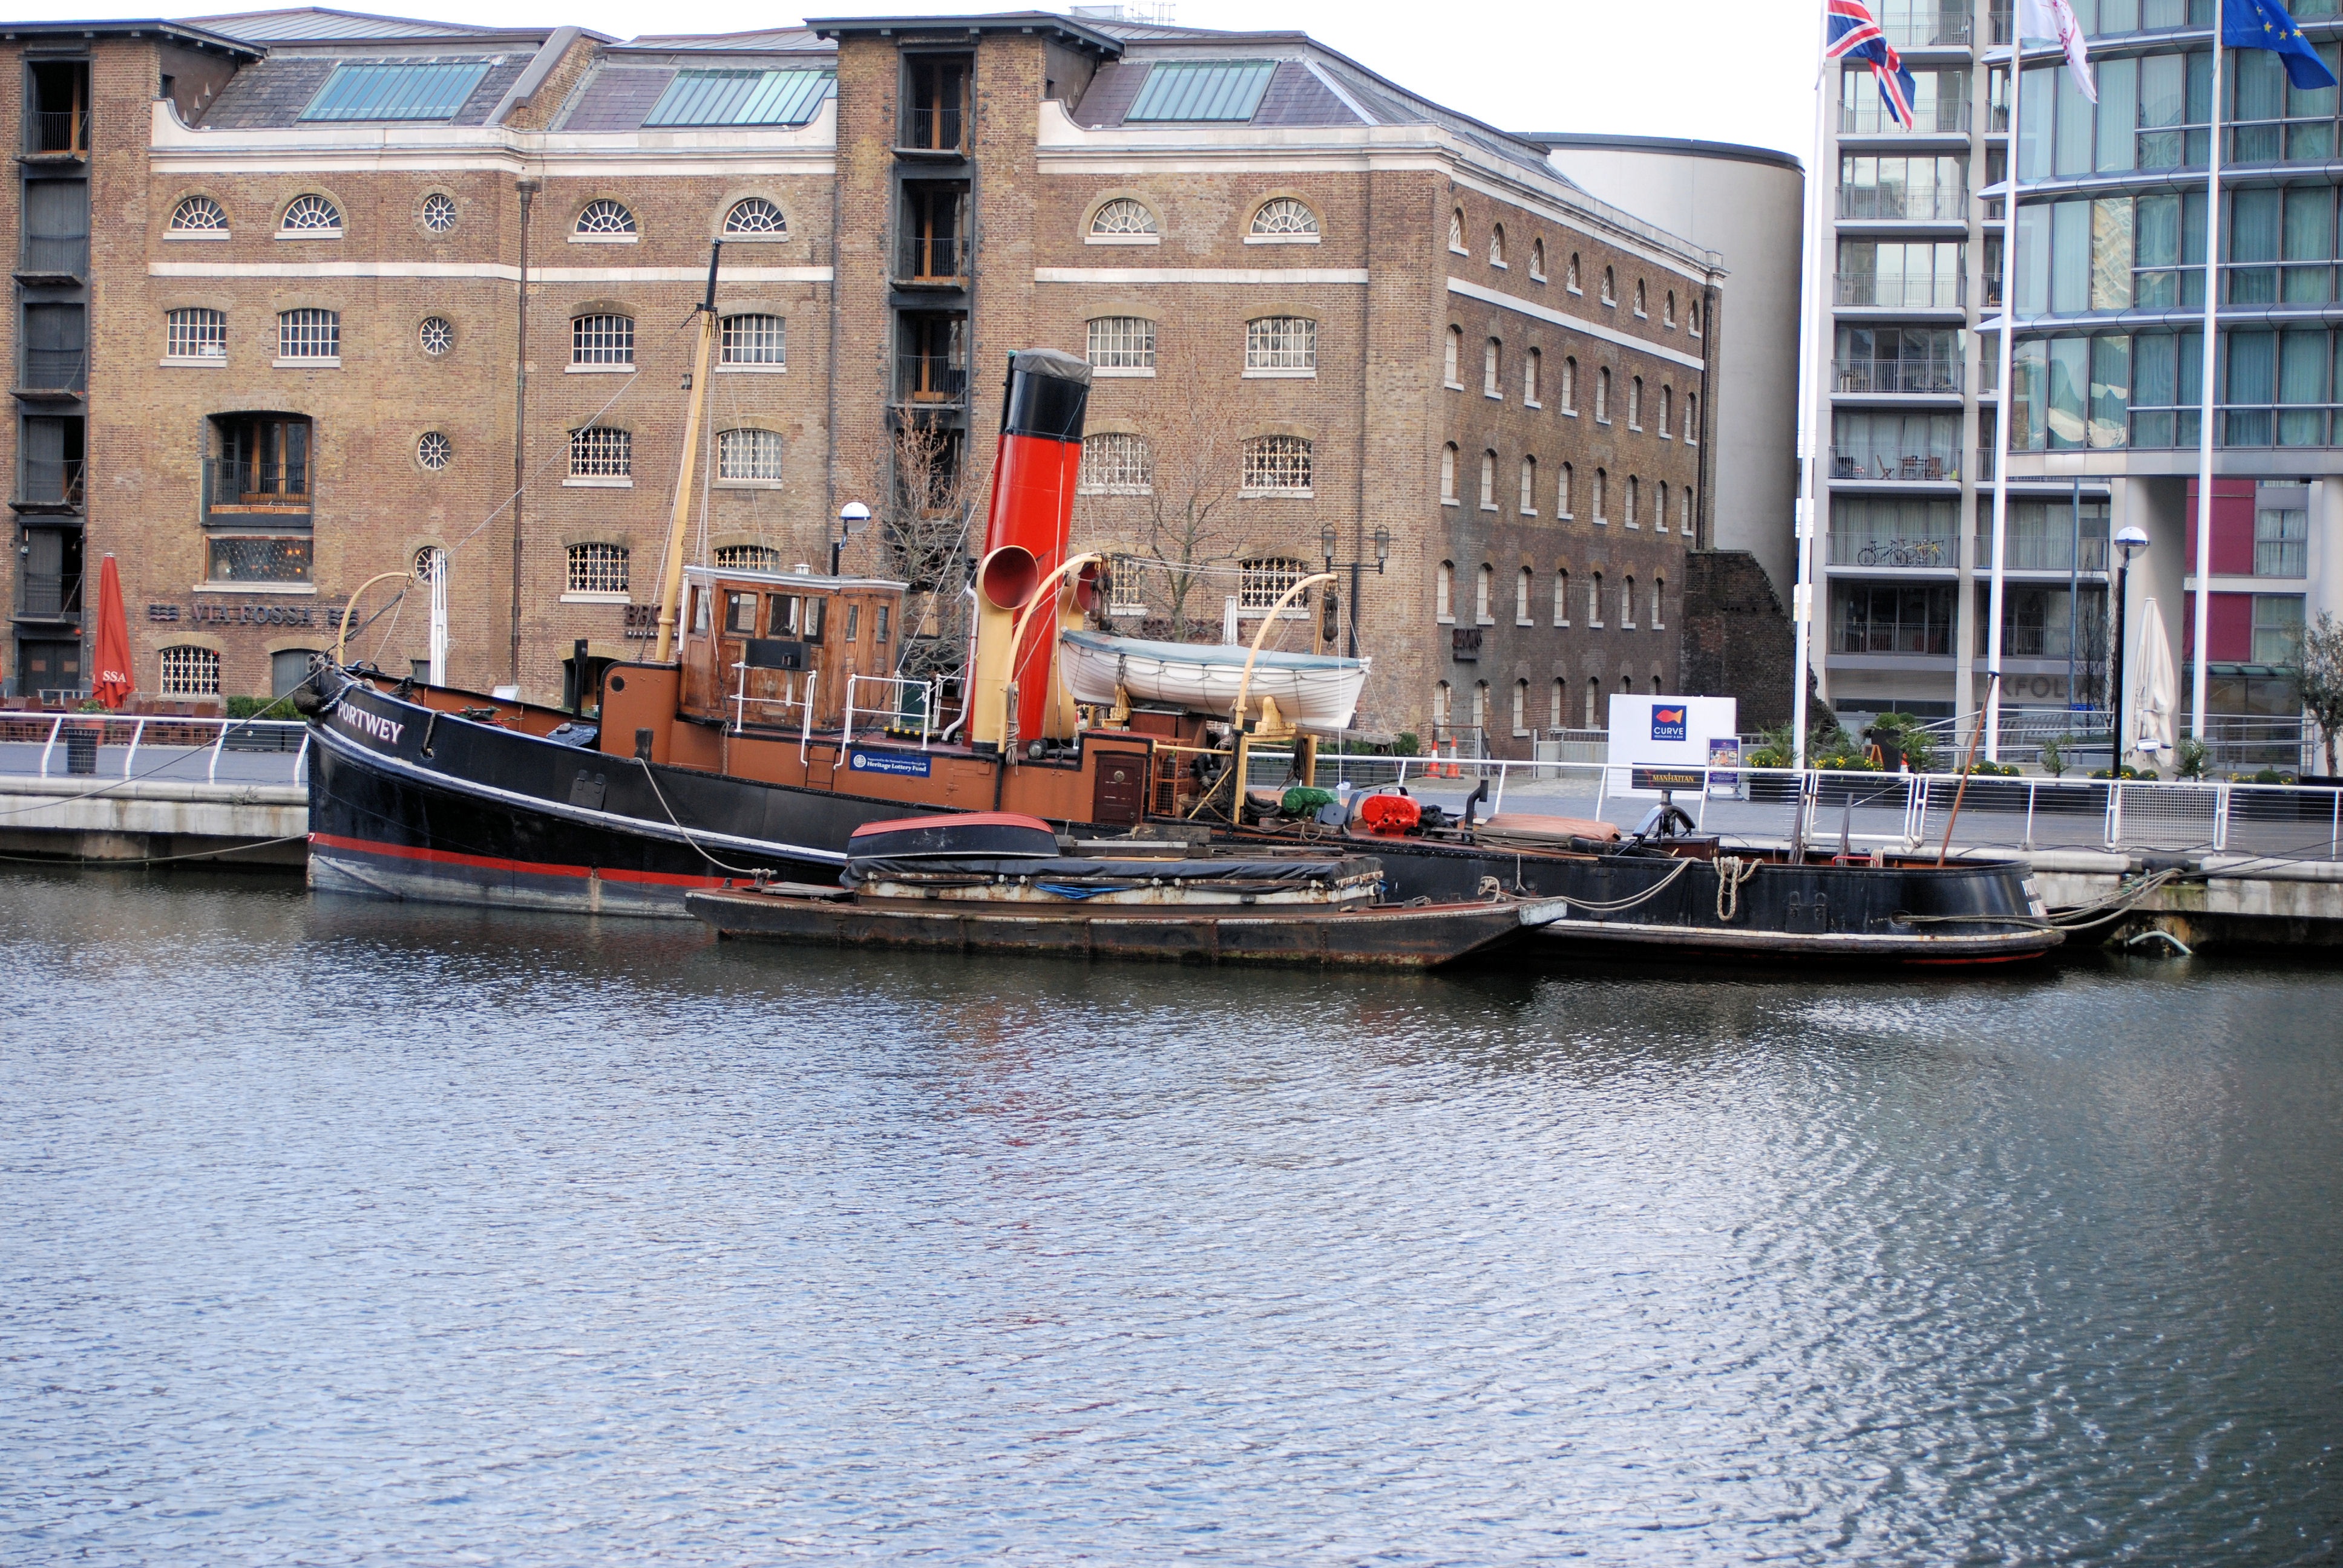 docklands, canary, wharf, london, boat, water, nautical vessel